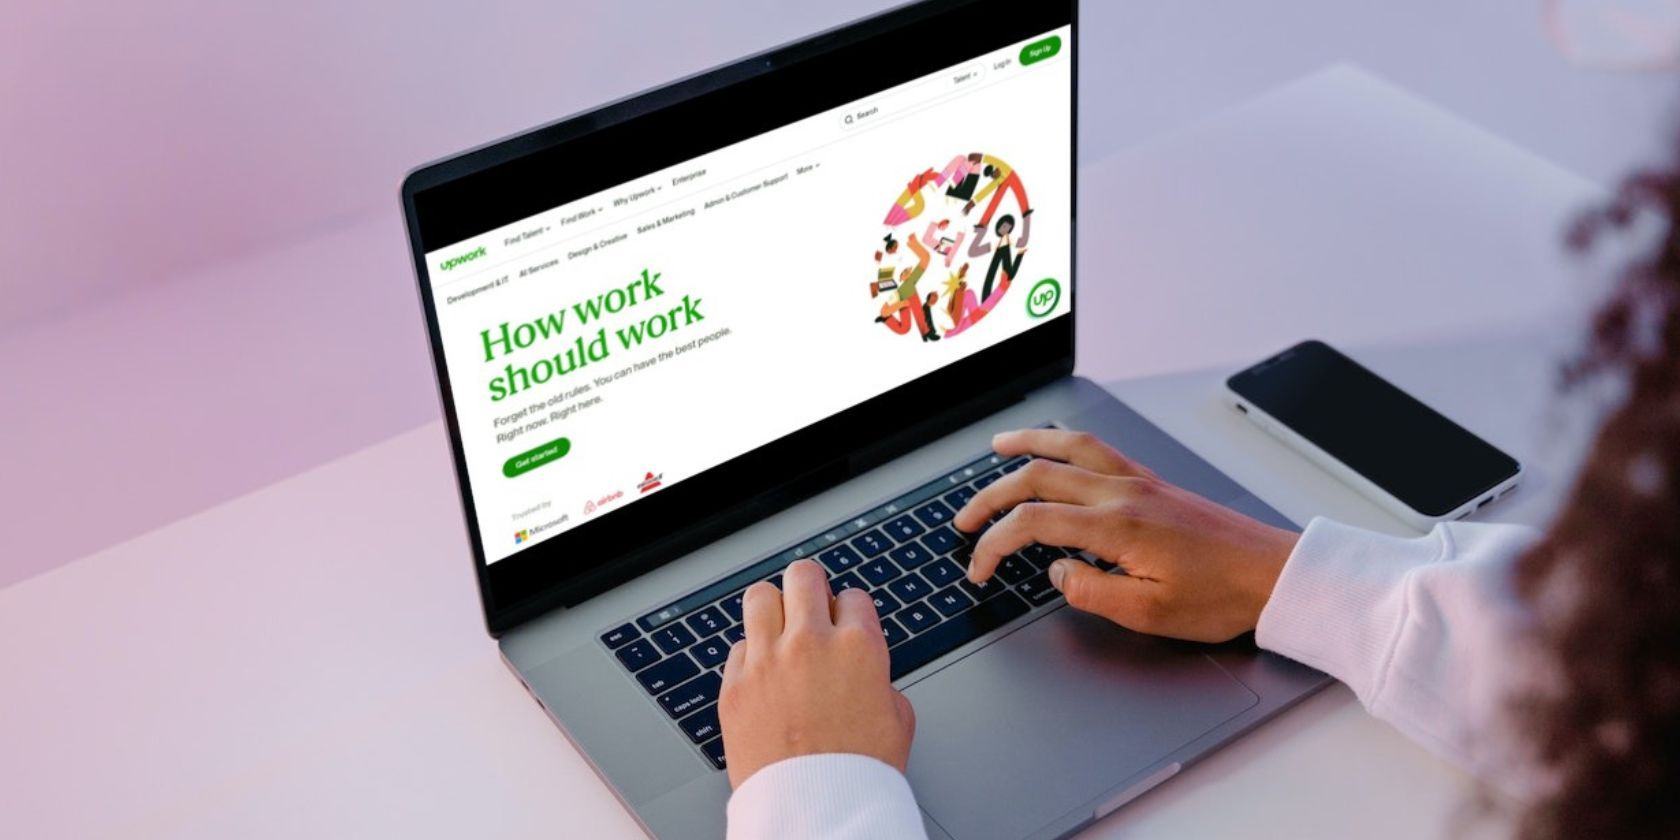 NEW TO UPWORK? HOW TO QUICKLY BOOST YOUR CREDIBILITY WITH THE